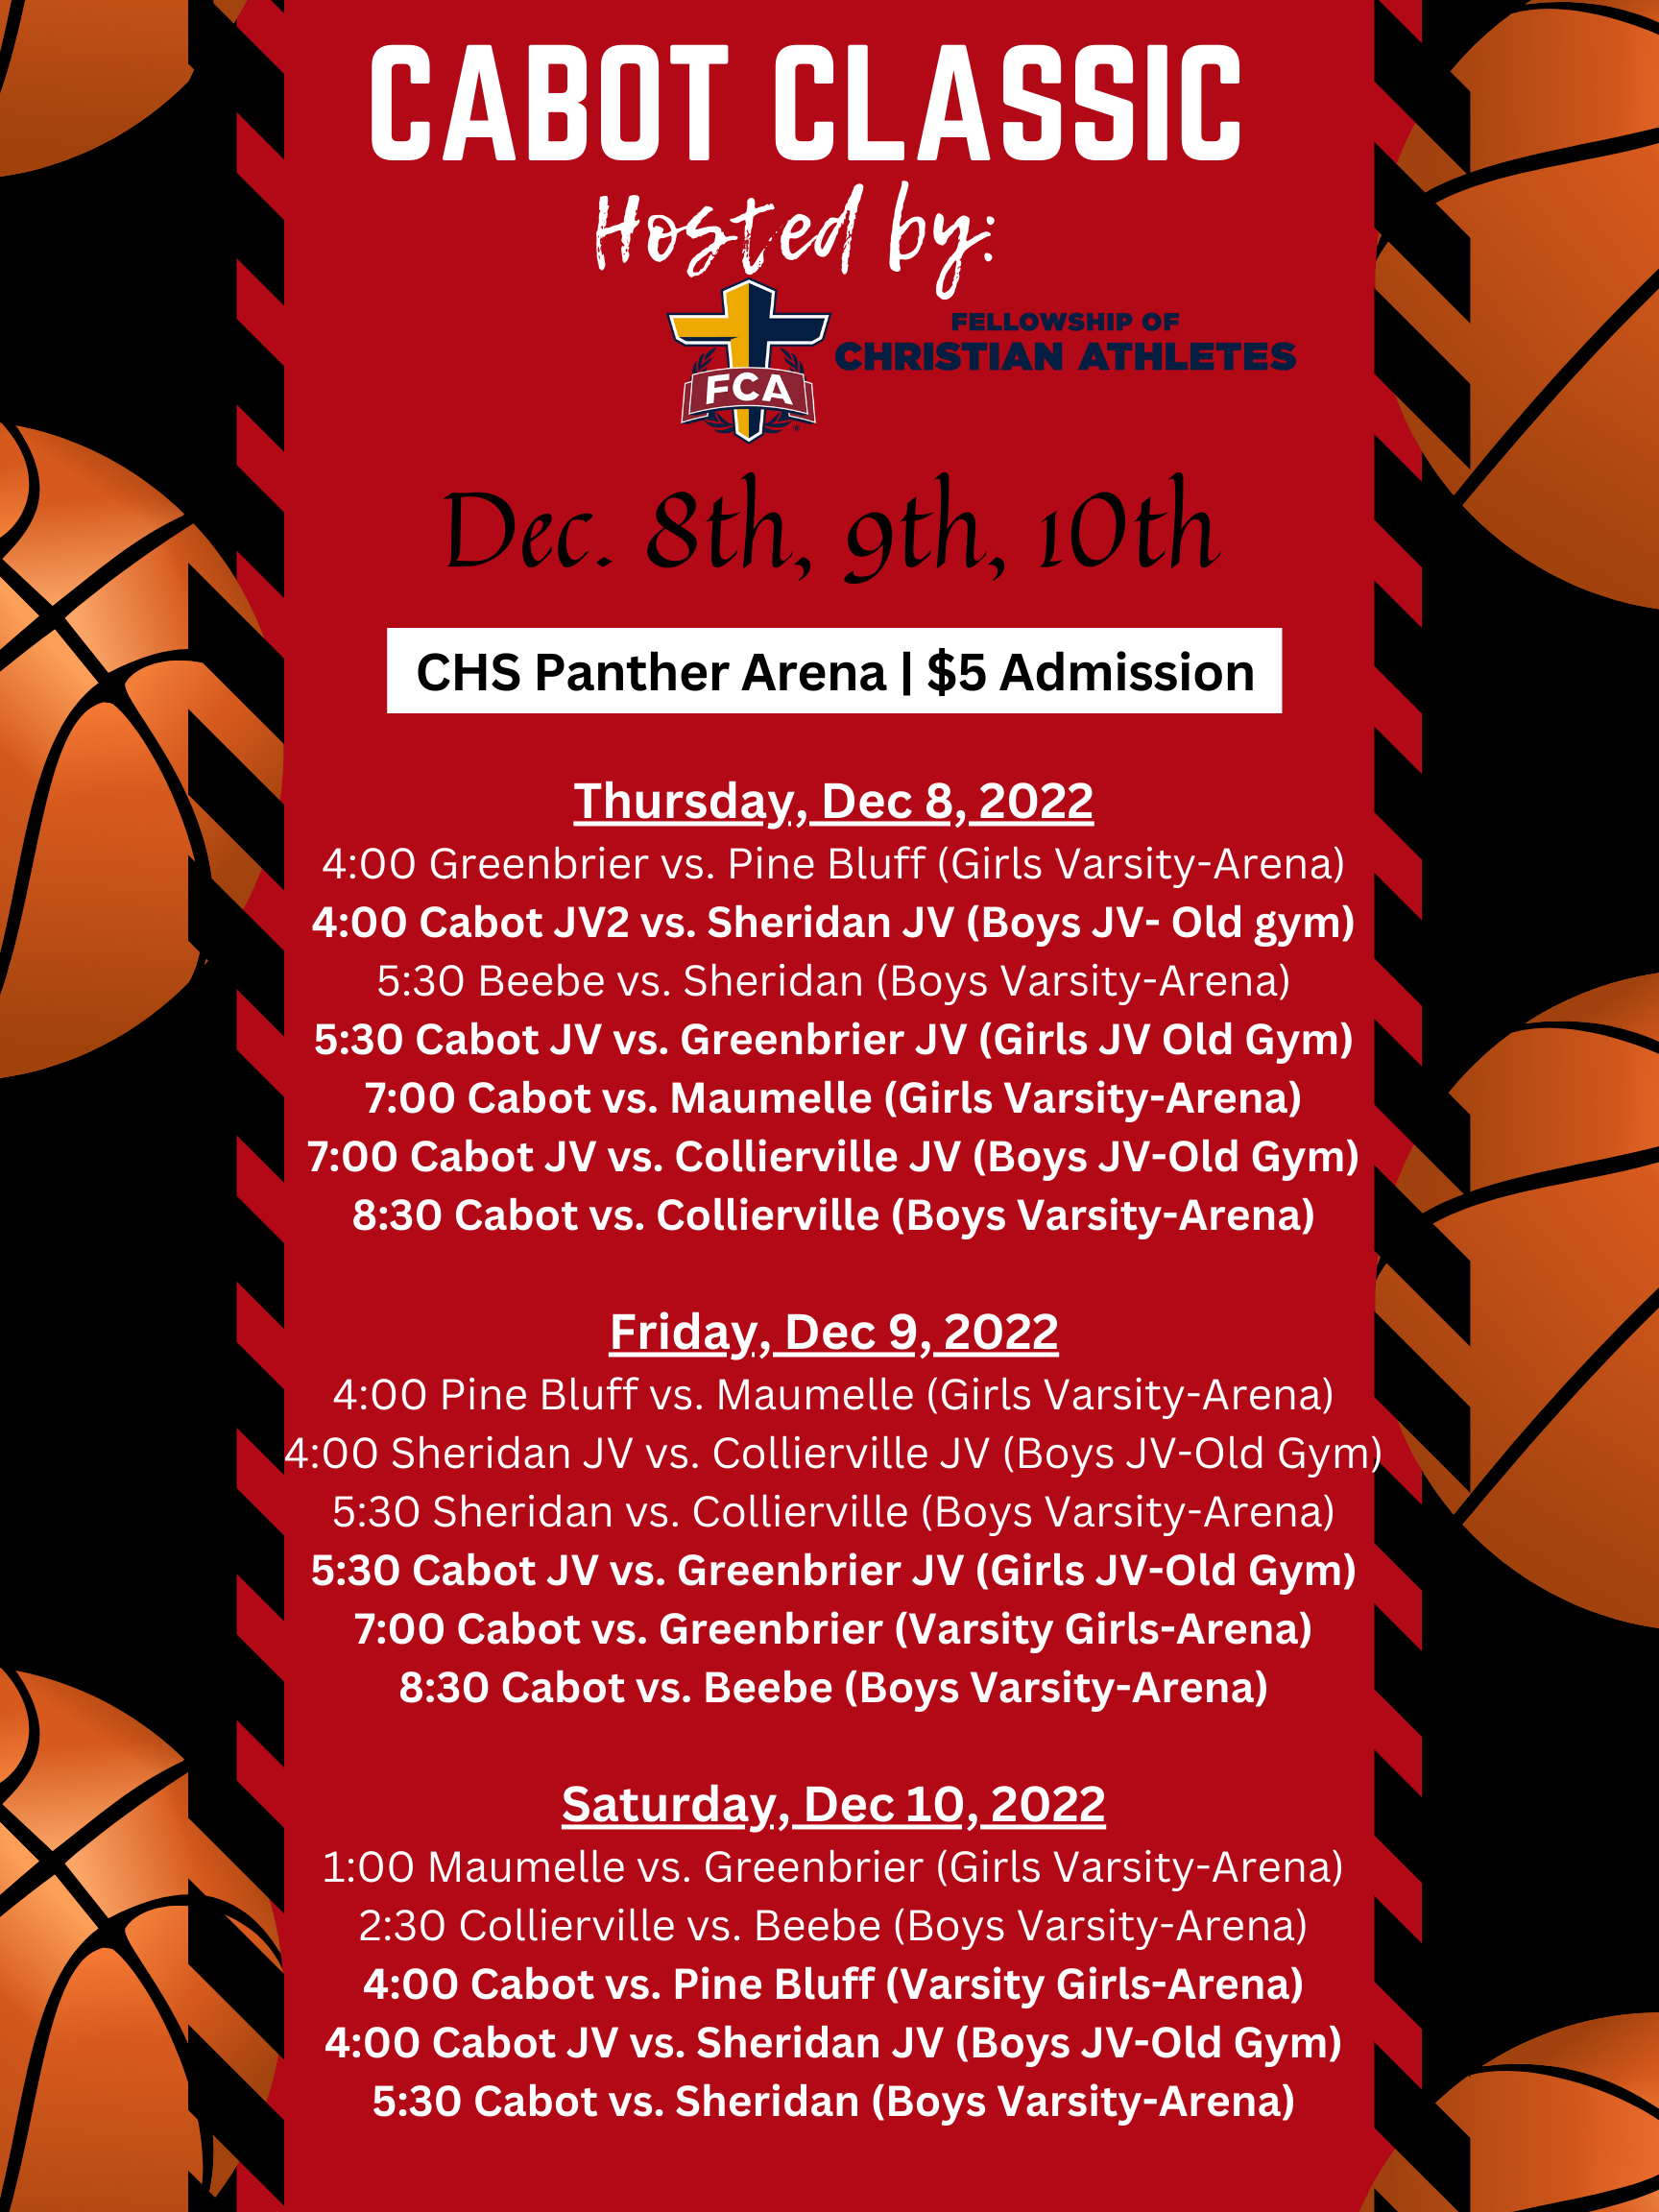 2022 Cabot Basketball Classic Schedule